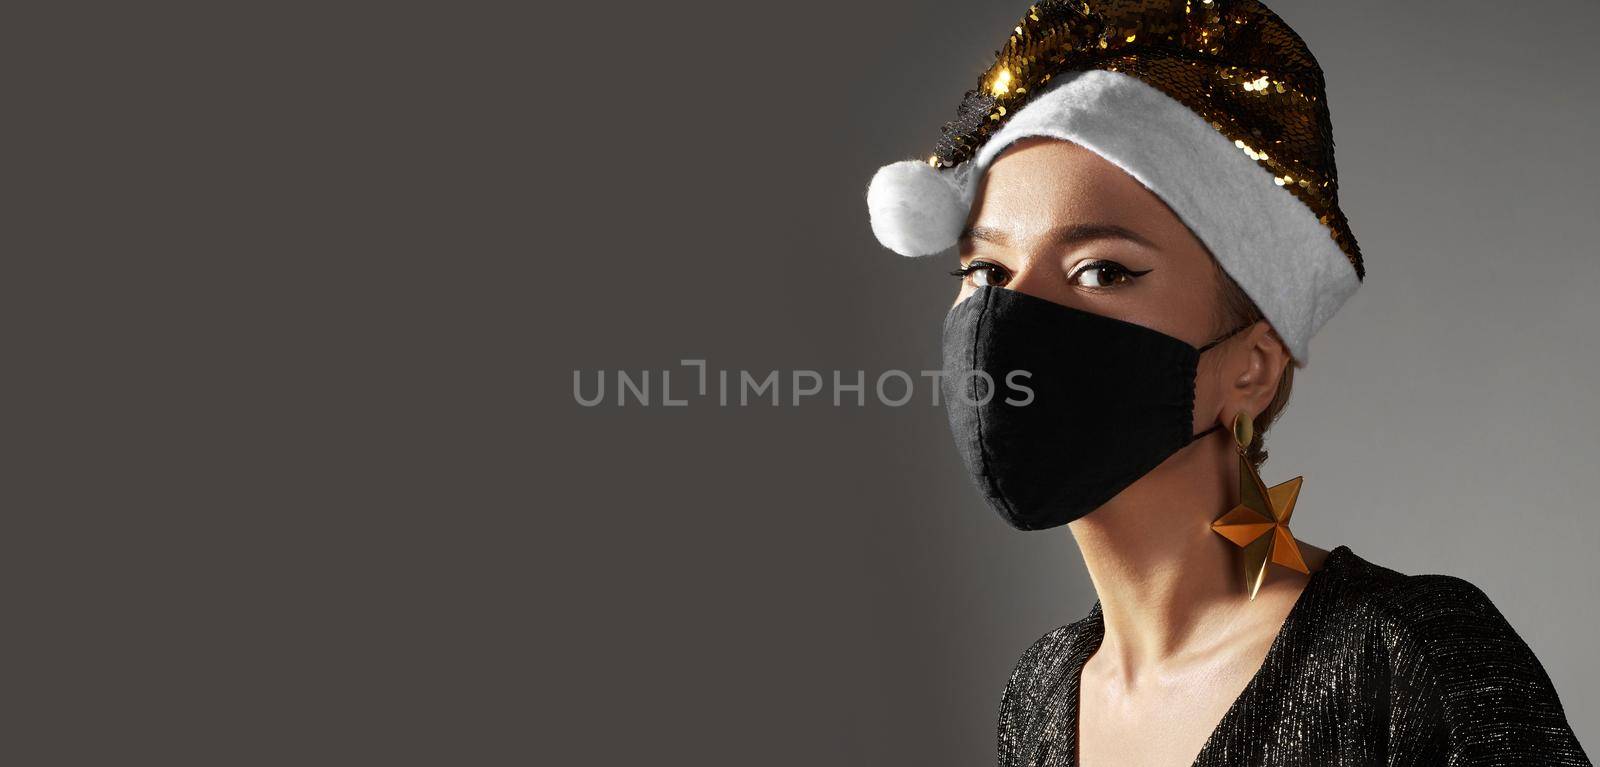 Woman with gold christmas hat, black medical mask. Fashion style with shiny clothes and accessories for xmas time. Protect yourself from Coronavirus Covid-19 even on holidays